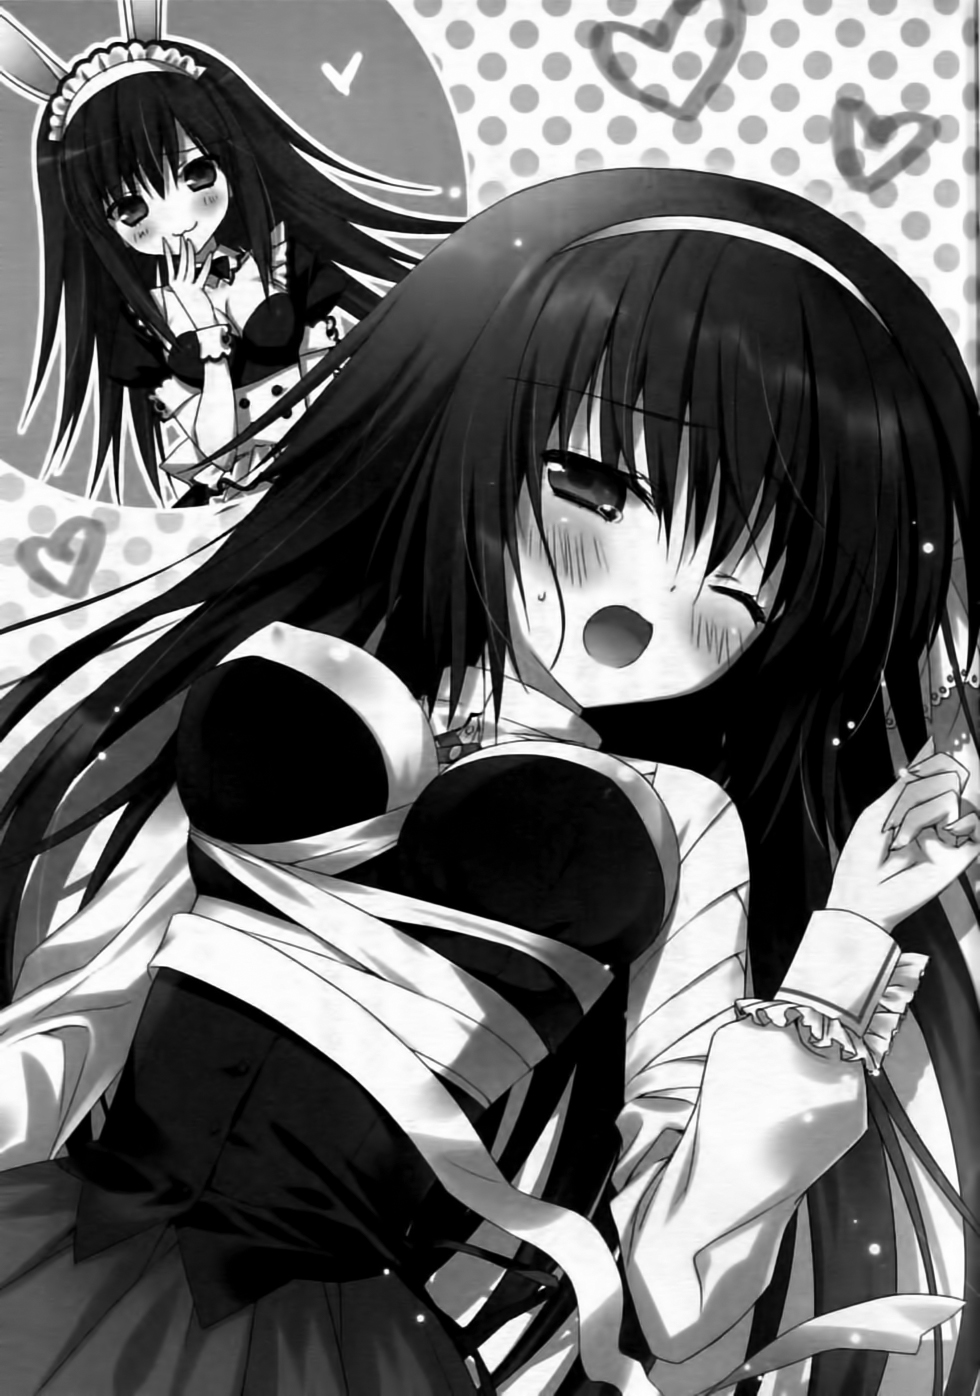 Absolute Duo Vol. 2 See more